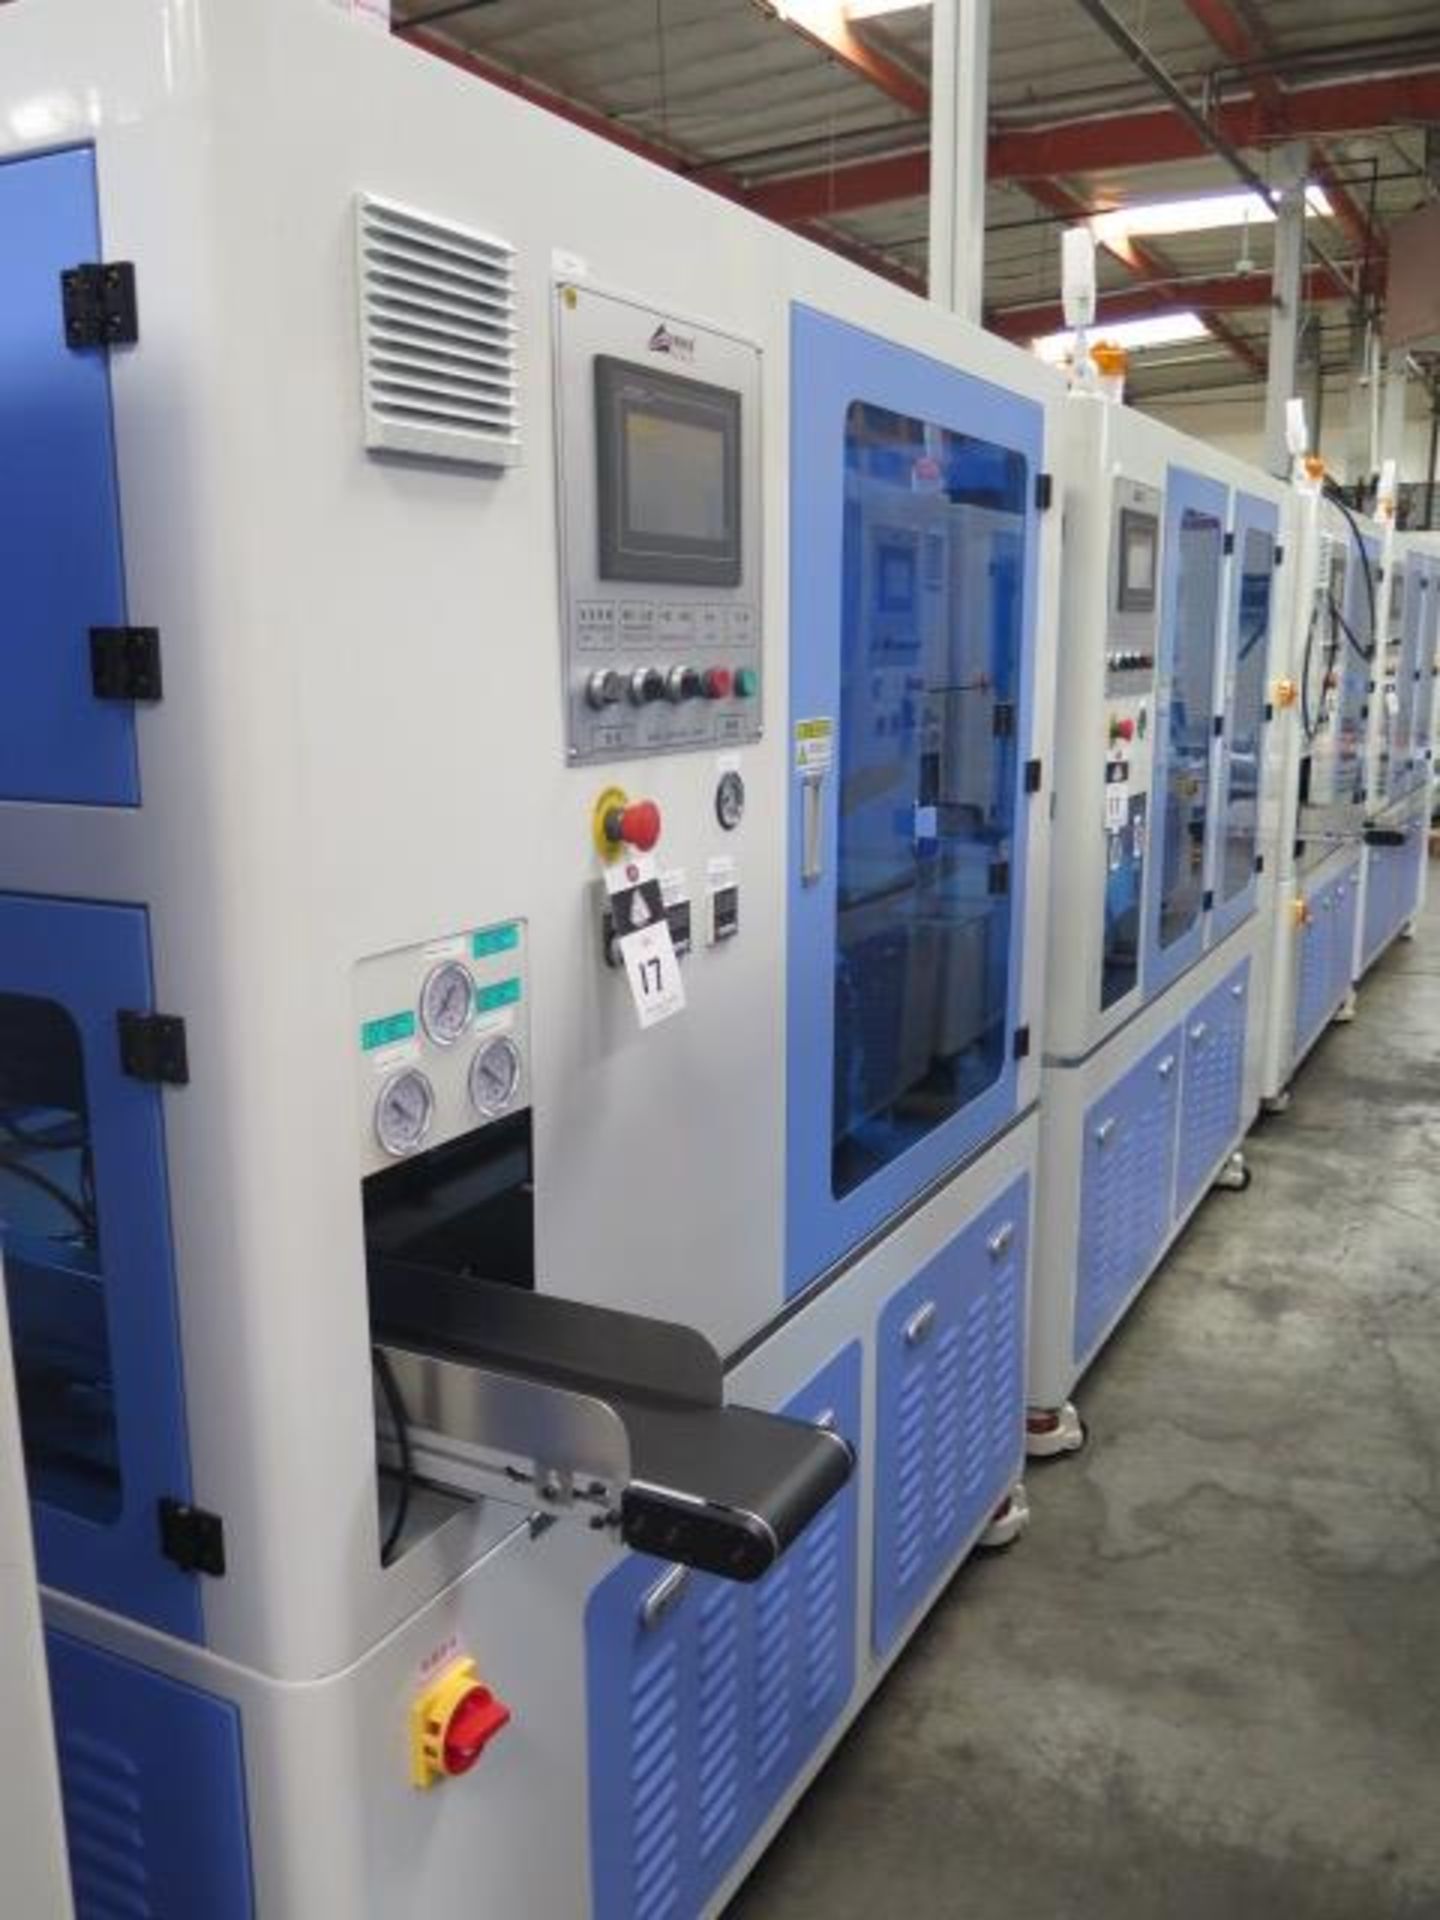 2/2021 Gereke mdl. GRK-TWO1 Cassette Assembly and Packaging Line s/n GRK20210227038, SOLD AS IS